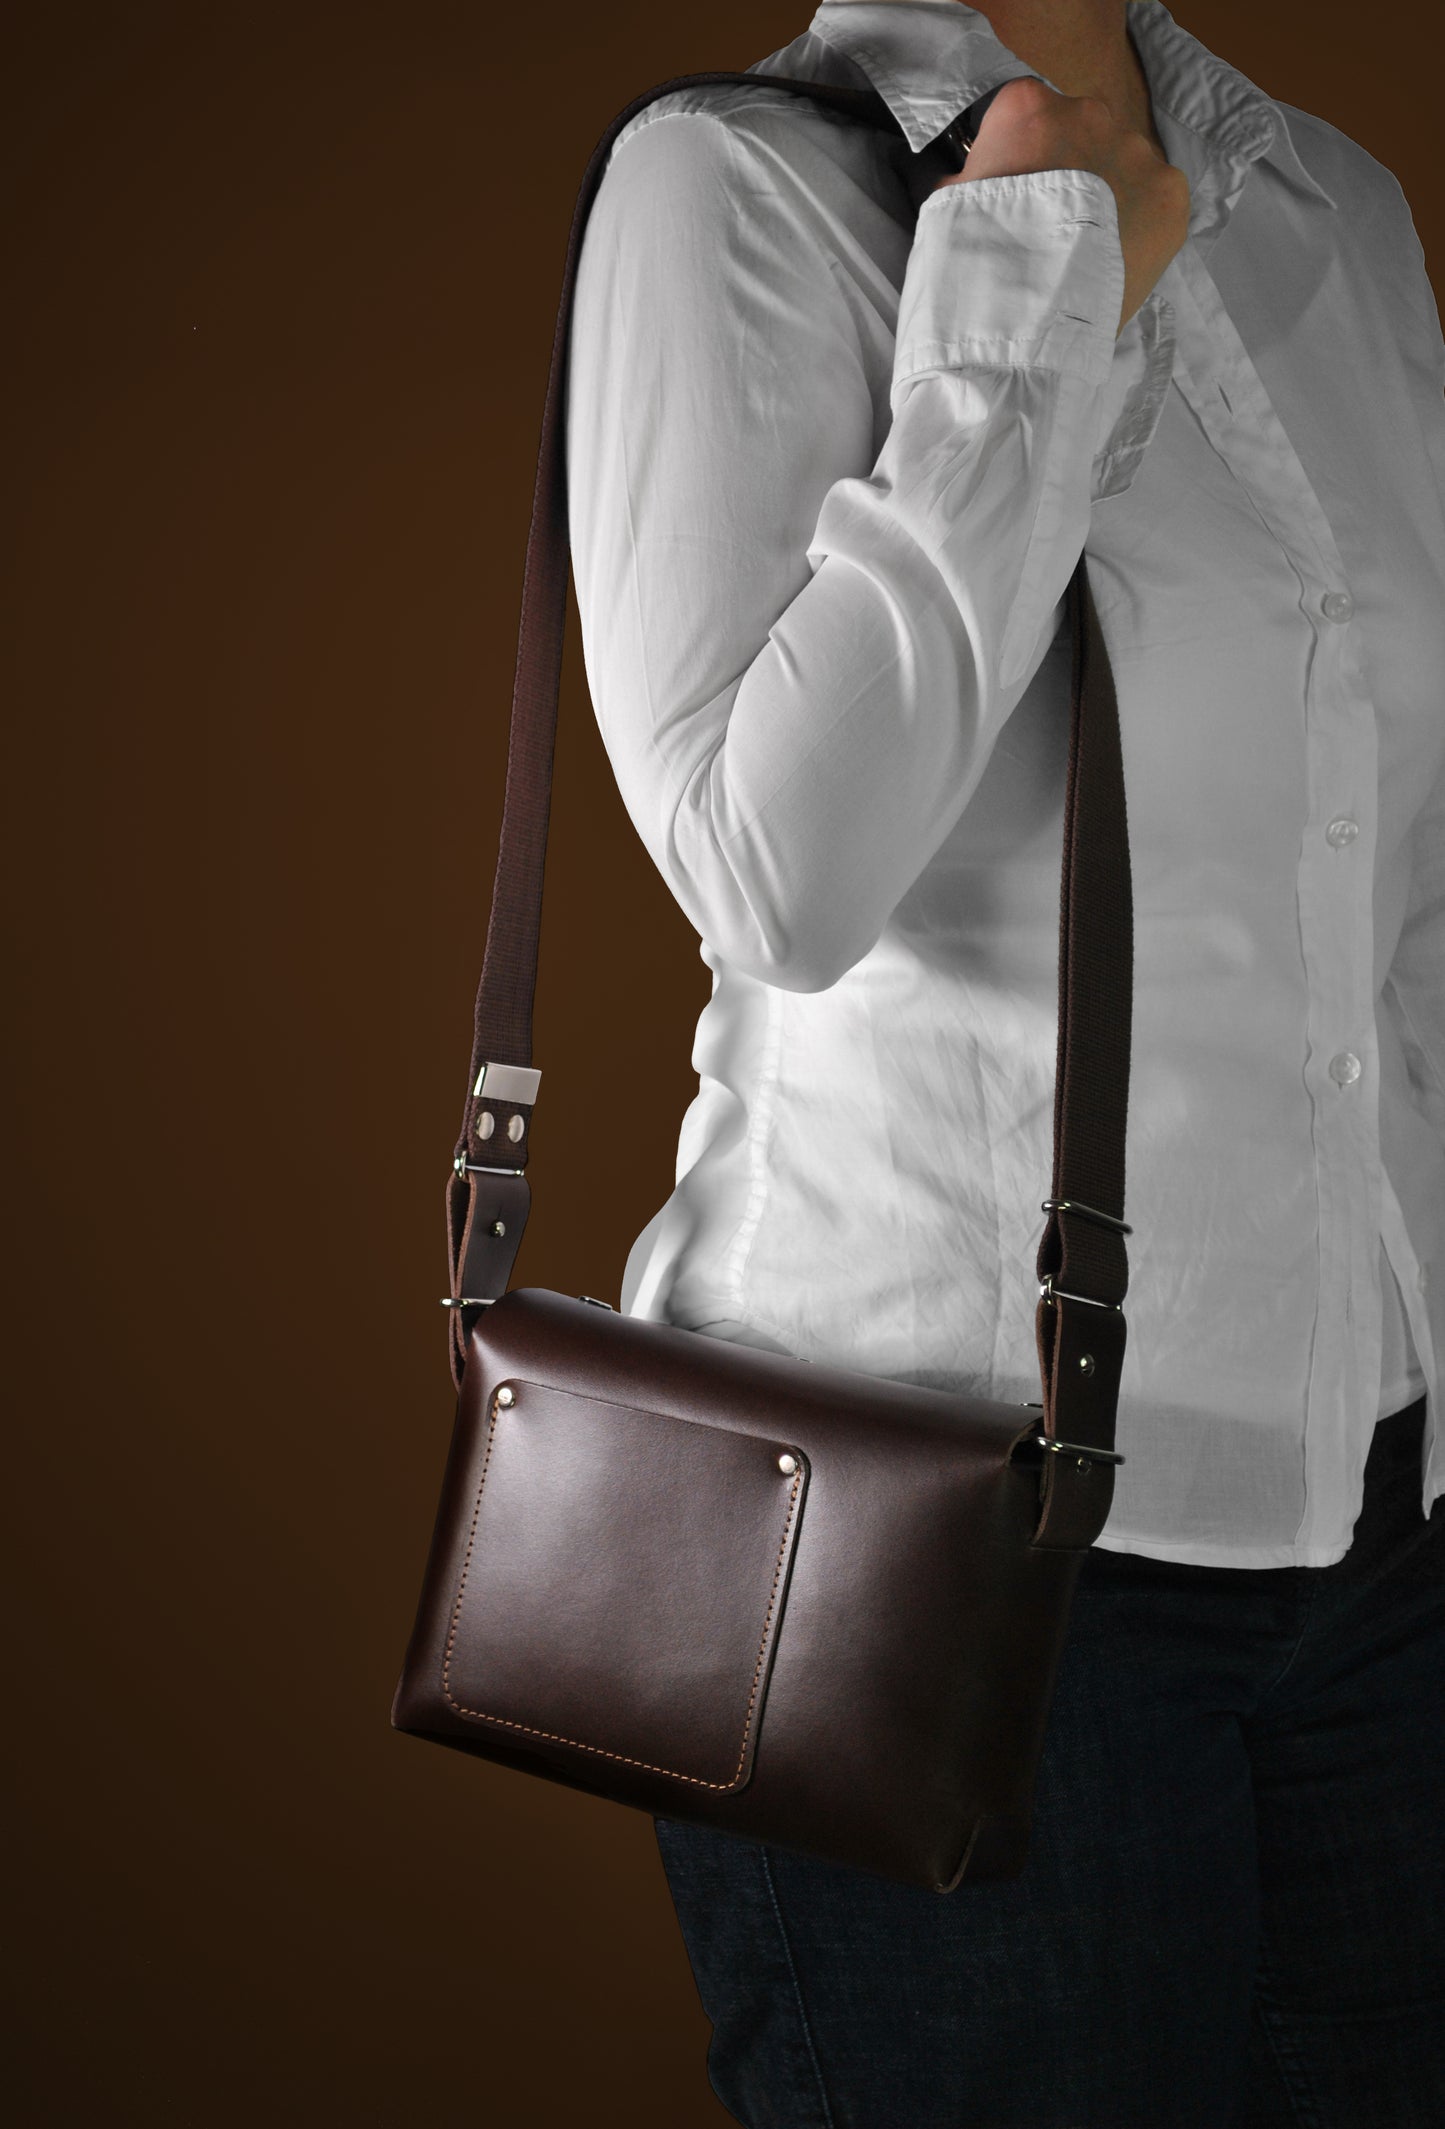 Chestnut Leather Crossbody Bag Casual Everyday Carry